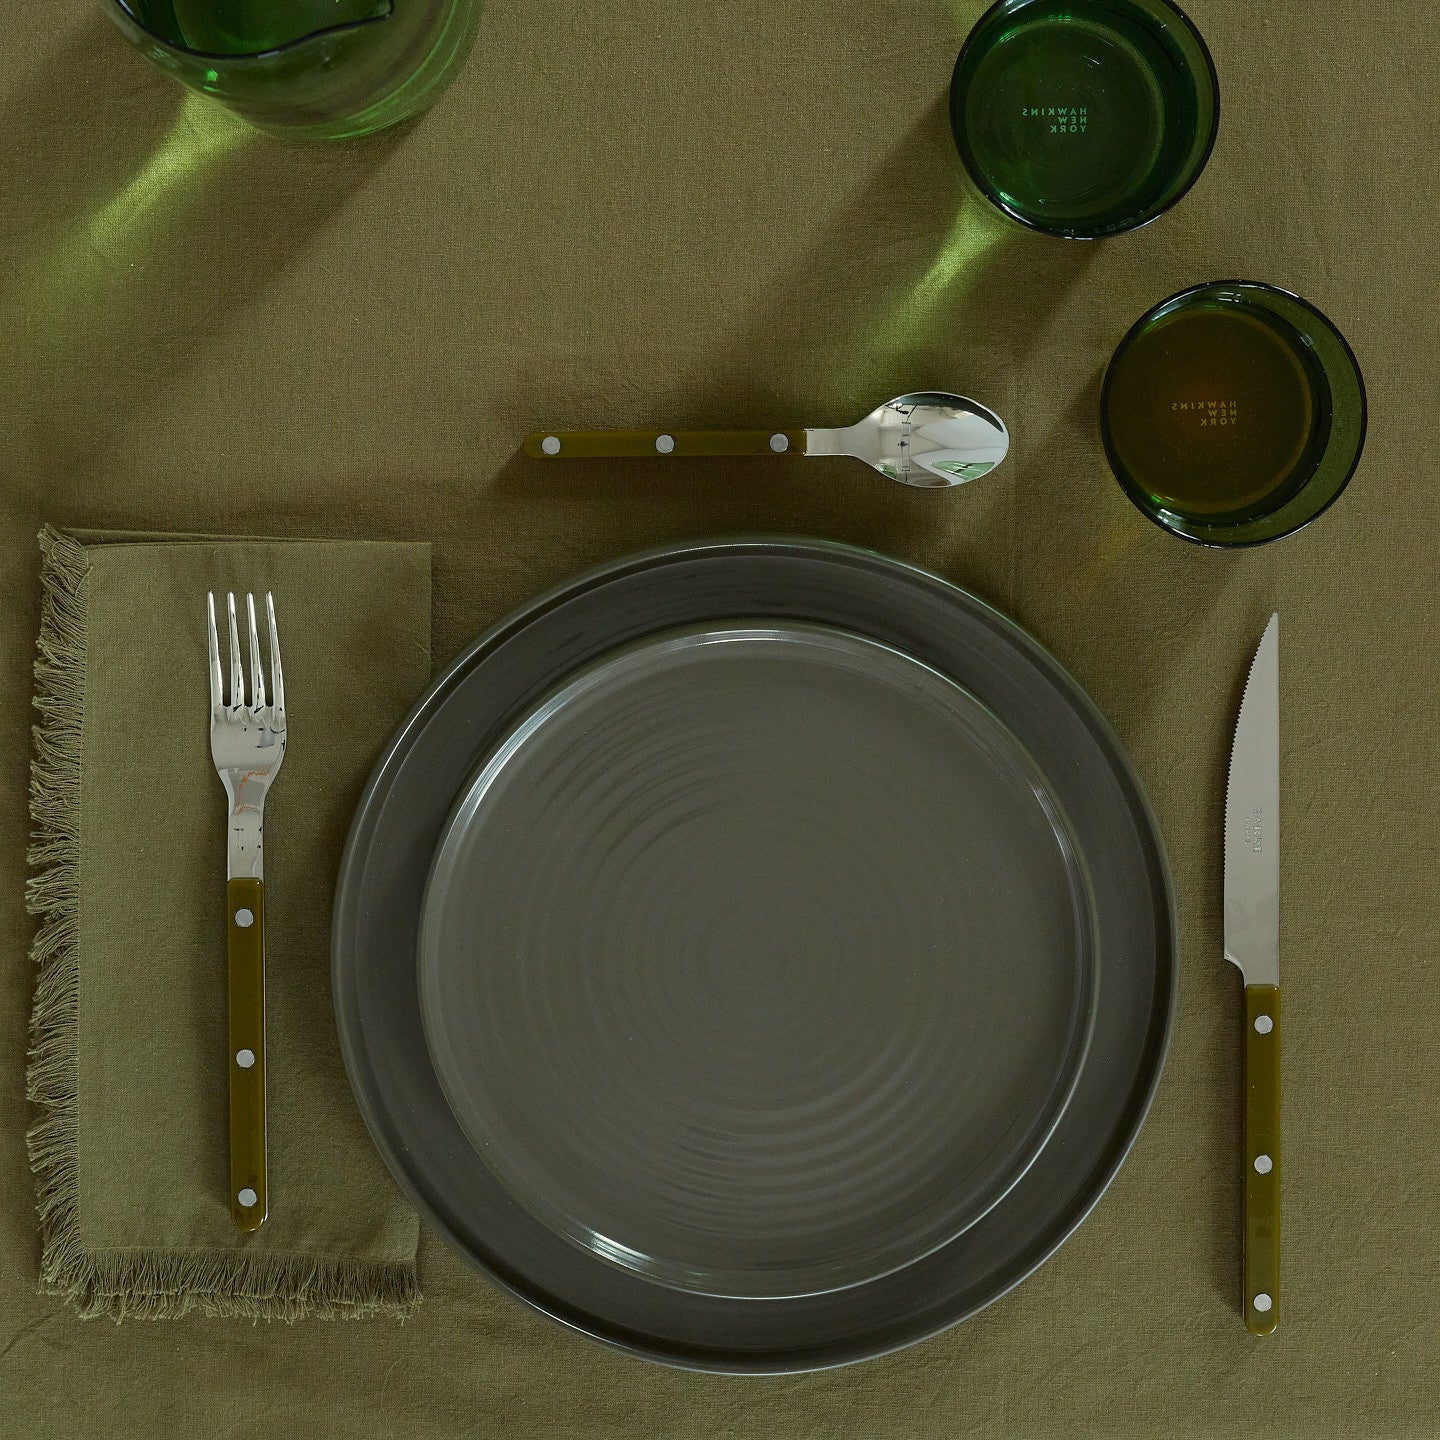 Placesetting on Essential Striped Tablecloth in Olive.